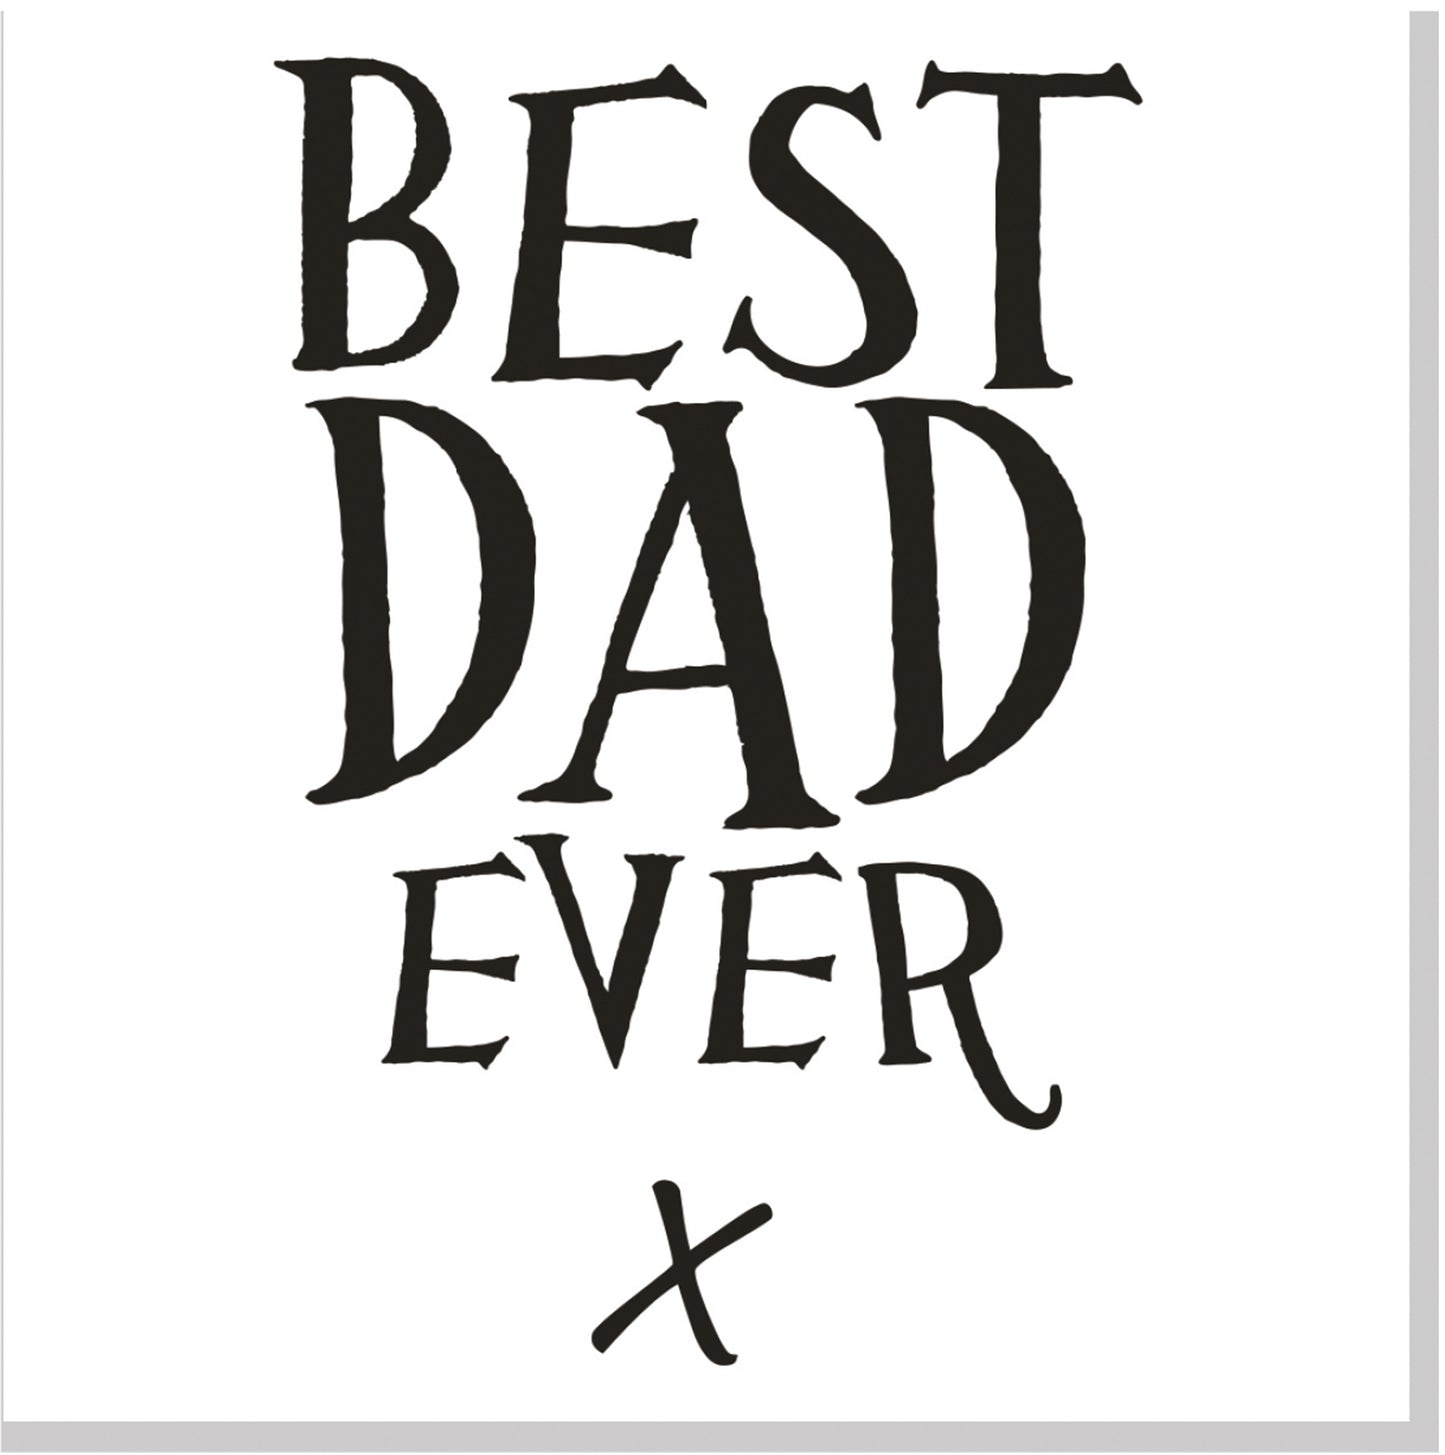 Best Dad ever square card